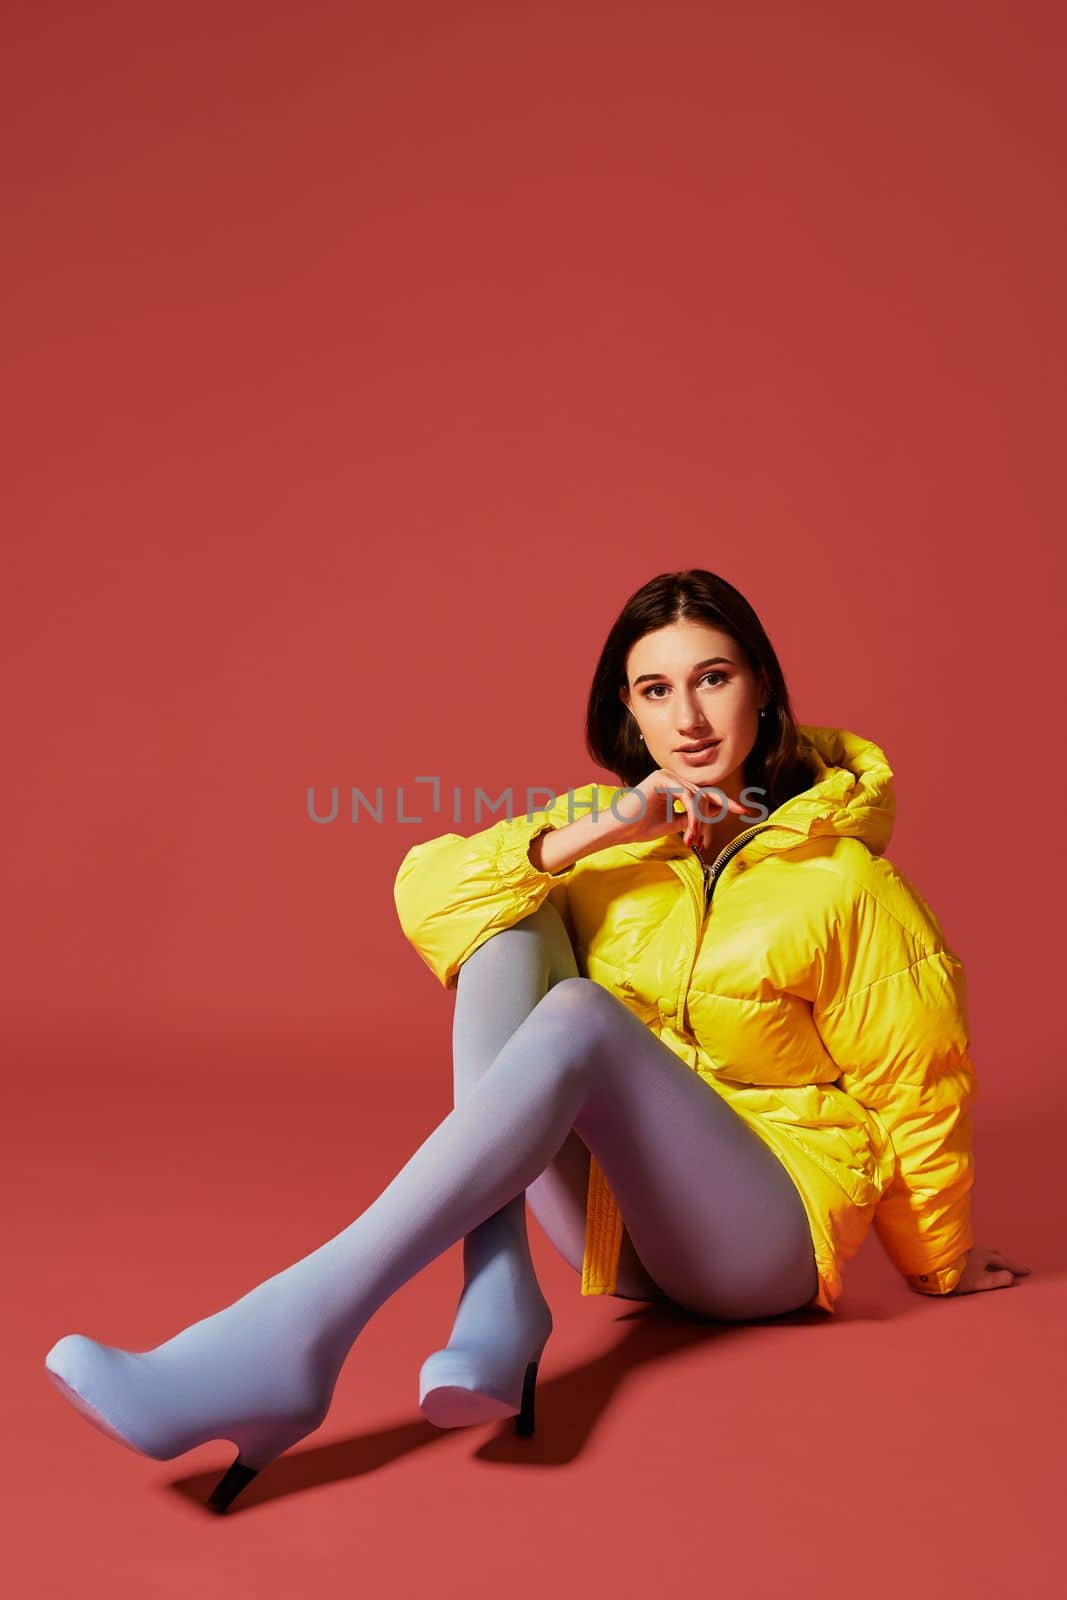 Young dark haired girl sitting on the floor before camera in studio on red background. Fashion image of stylish woman wearing yellow jacket